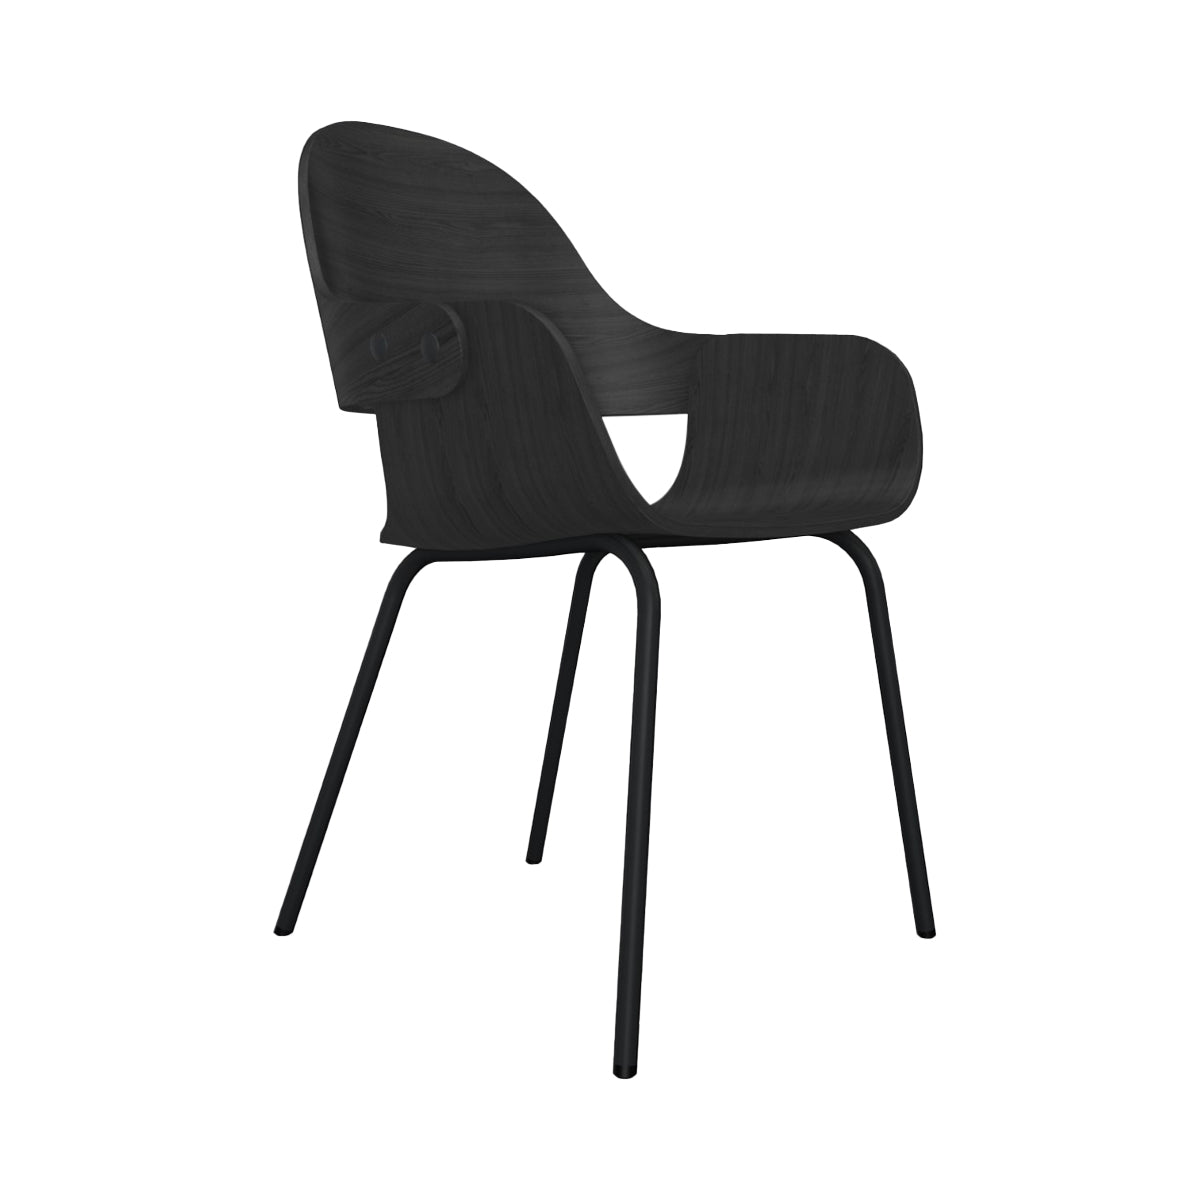 Showtime Nude Chair with Metal Base: Ash Stained Black